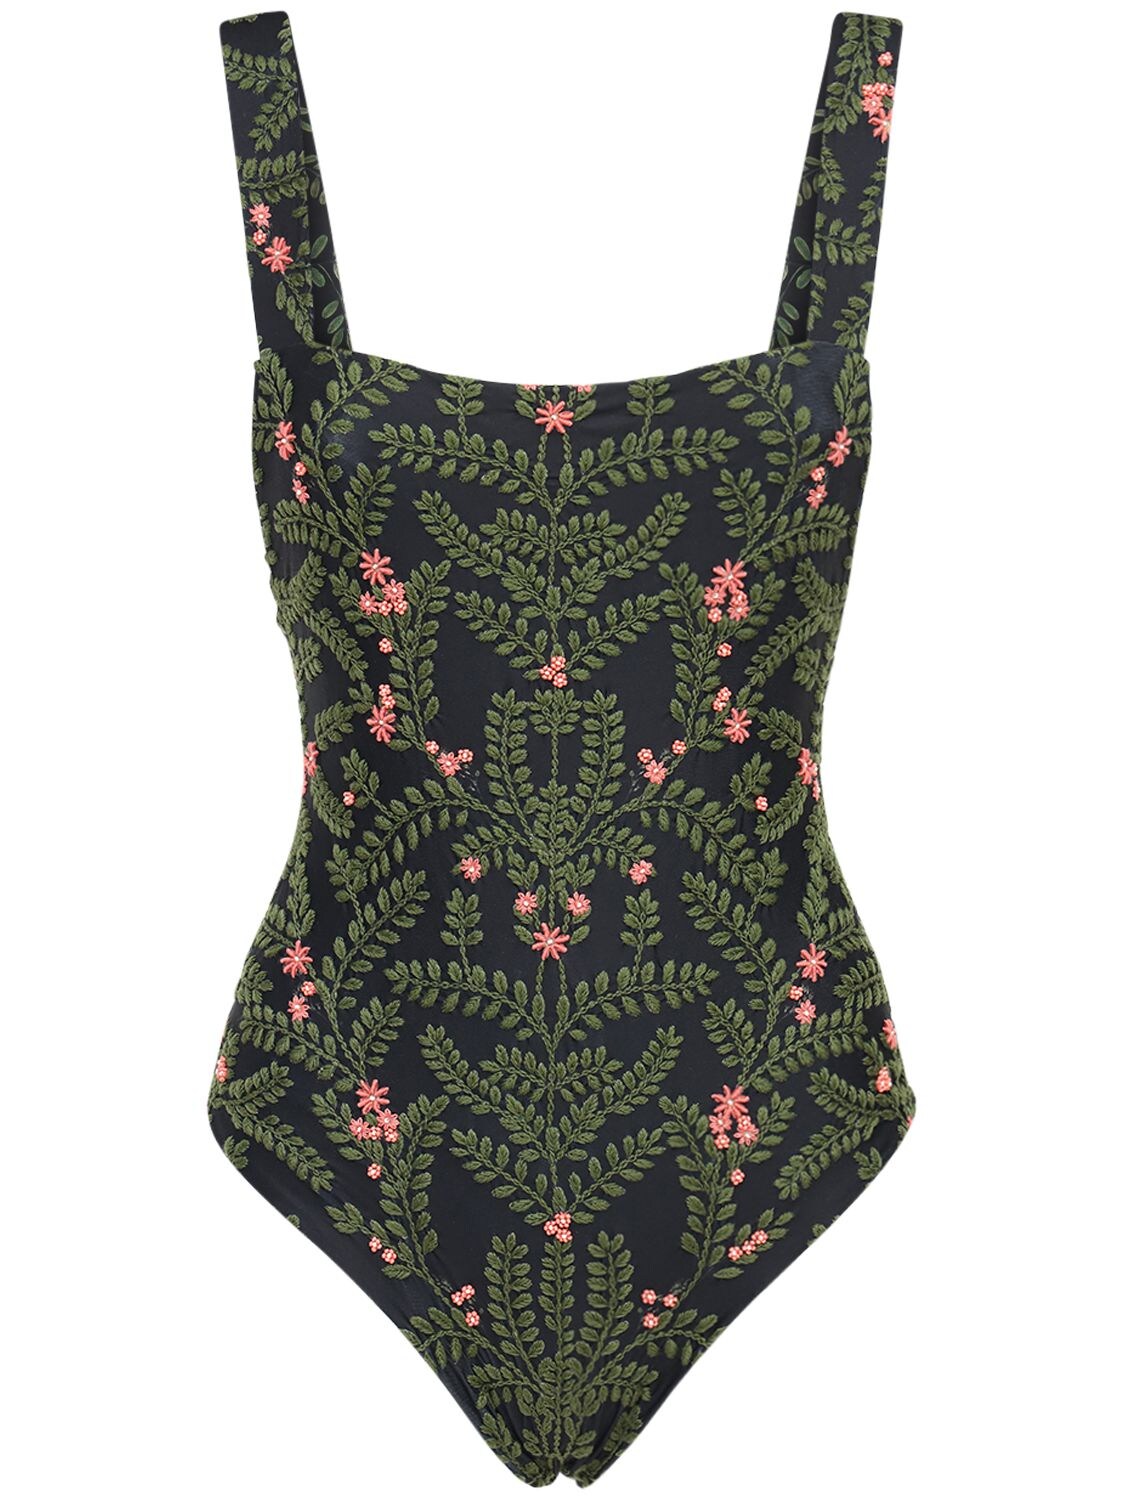 AGUA BY AGUA BENDITA CAFE EMBROIDERED ONE PIECE SWIMSUIT,72ICE8017-SEVSQKFM0